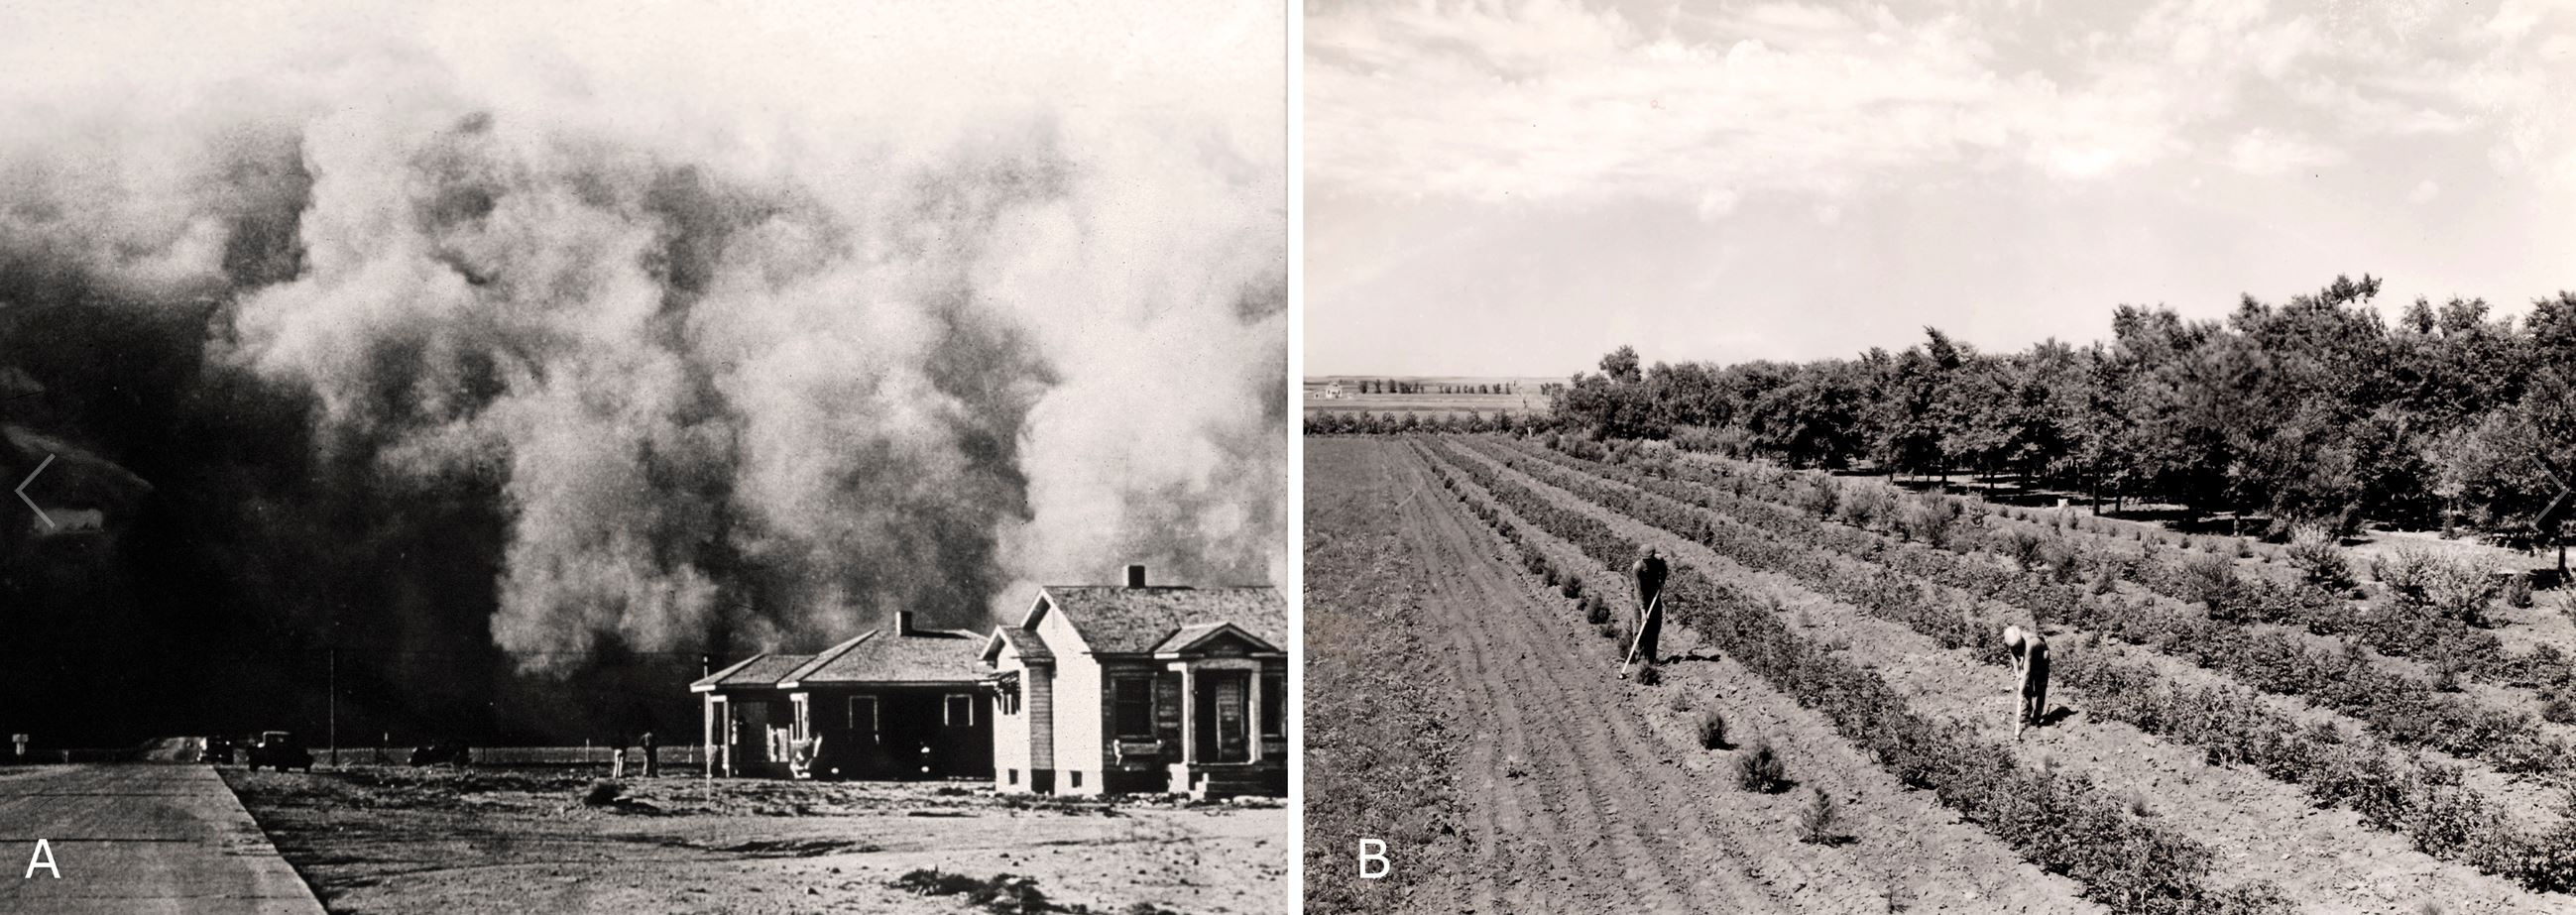 Figure 2. (A) A giant dust storm rolls across eastern Colorado during the 1930s. (B) Landowners tending to their windbreak planted with the Prairie States Forestry Project. Photos by the USDA, Natural Resources Conservation Service (A) and Forest Service (B).